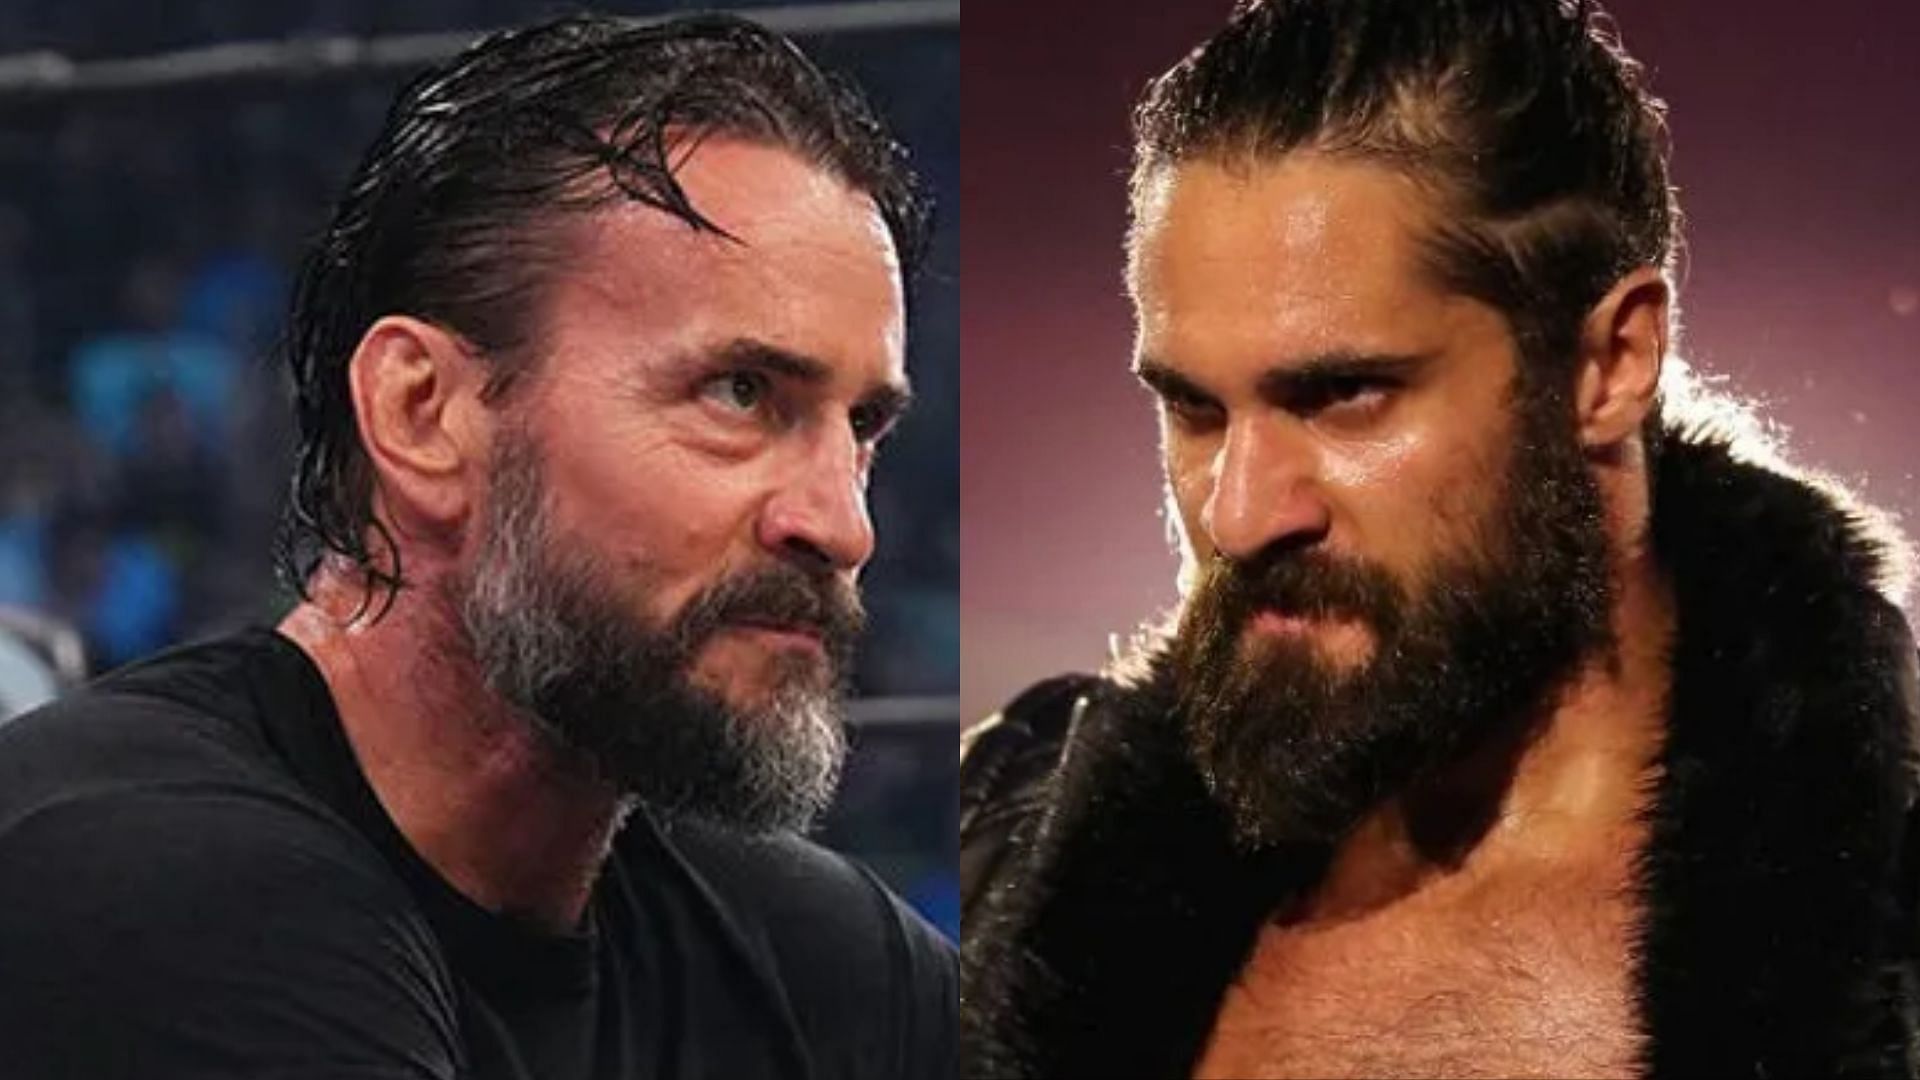 CM Punk and Seth Rollins were once foes on-screen in WWE